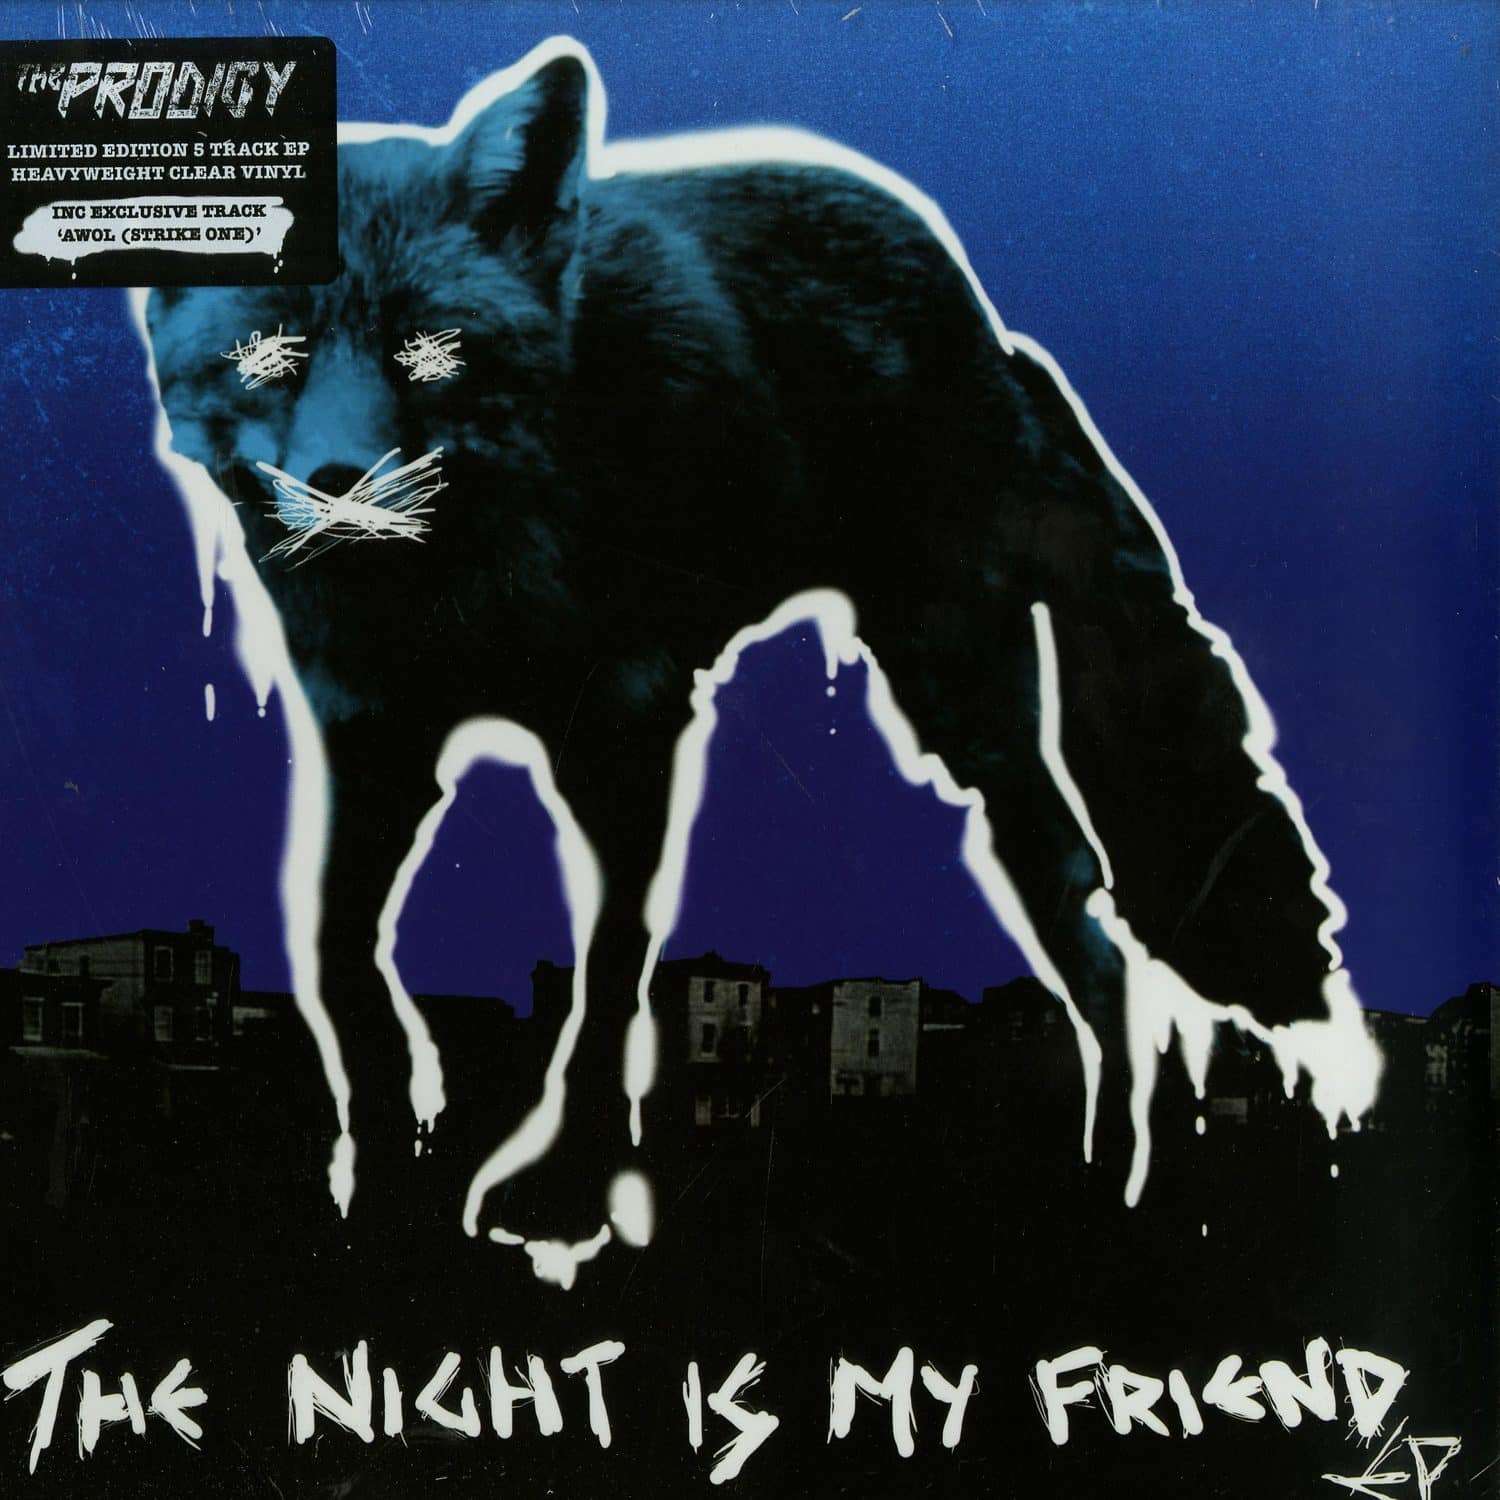 The Prodigy - THE NIGHT IS MY FRIEND EP 